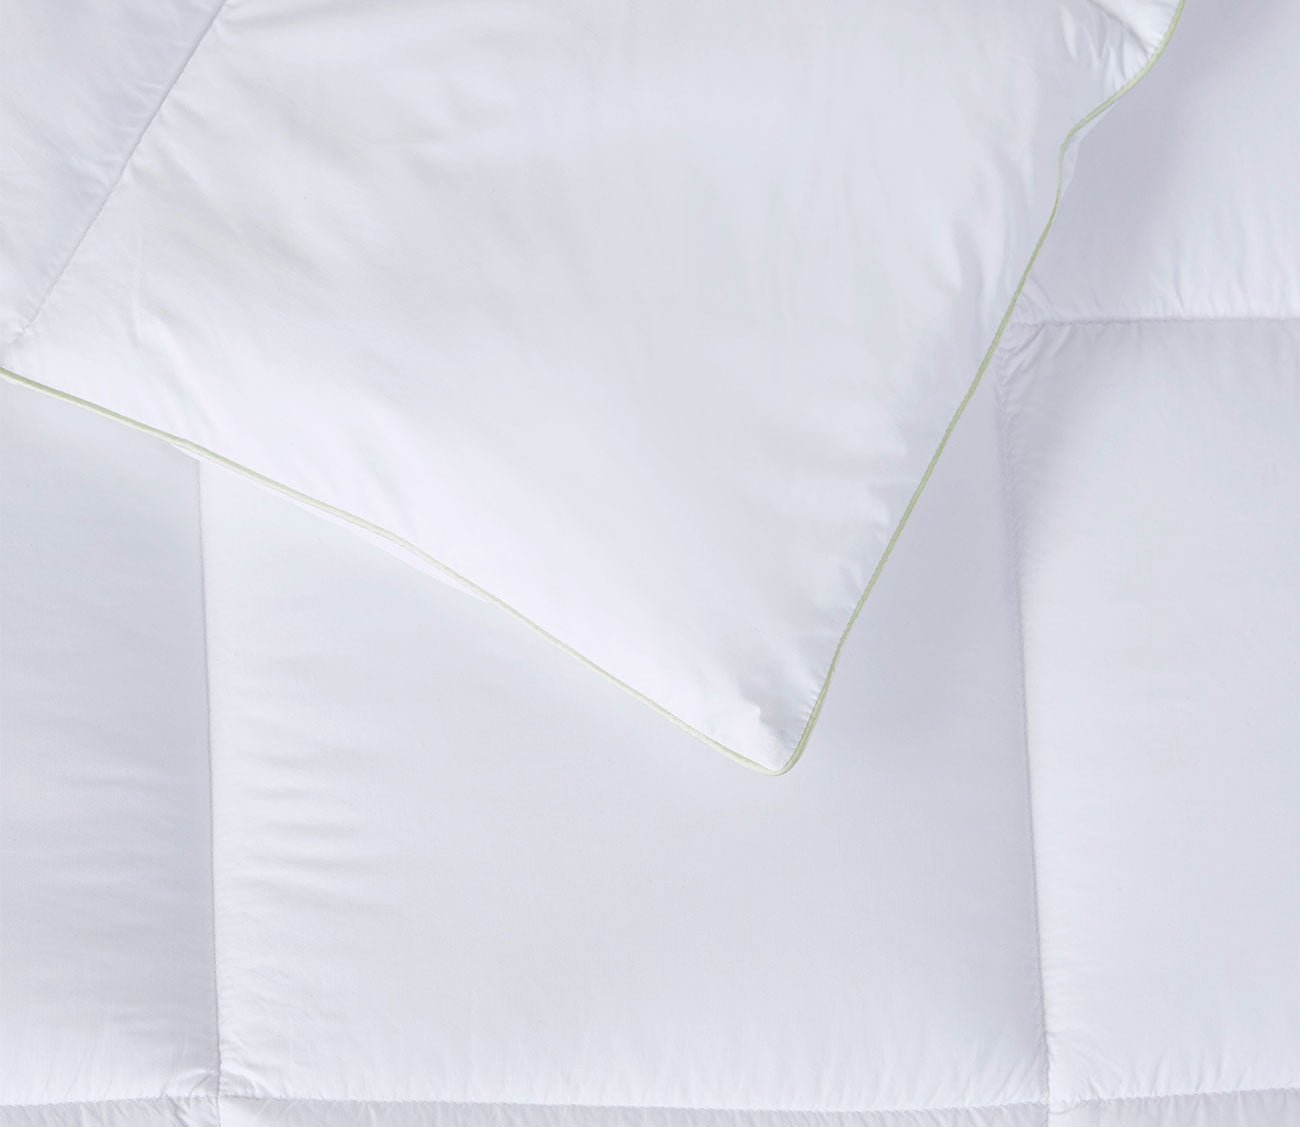 Allergen Barrier Antimicrobial Down Alternative Comforter by Clean Spaces